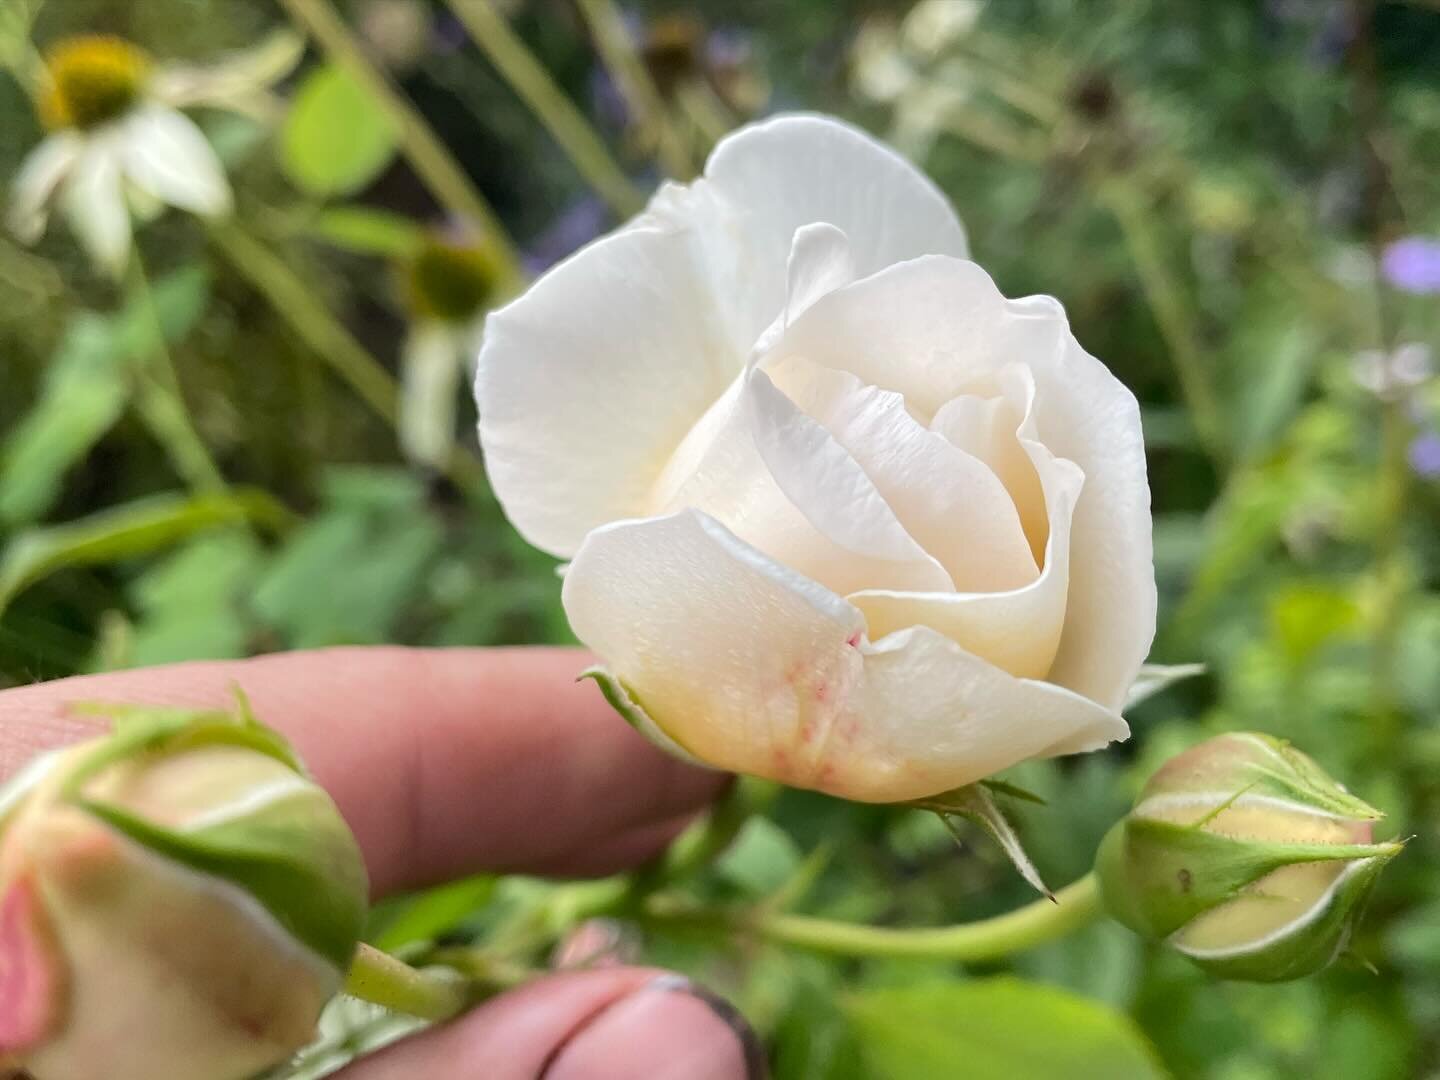 29 Days of Perennial Favorites:

For each day of February I&rsquo;ll put a spotlight on a hard-working, reliable perennial from the garden. 

Day 19: Rosa &lsquo;Claire Austin&rsquo;

This one&rsquo;s a bit of a curveball! 

While not always a plant 